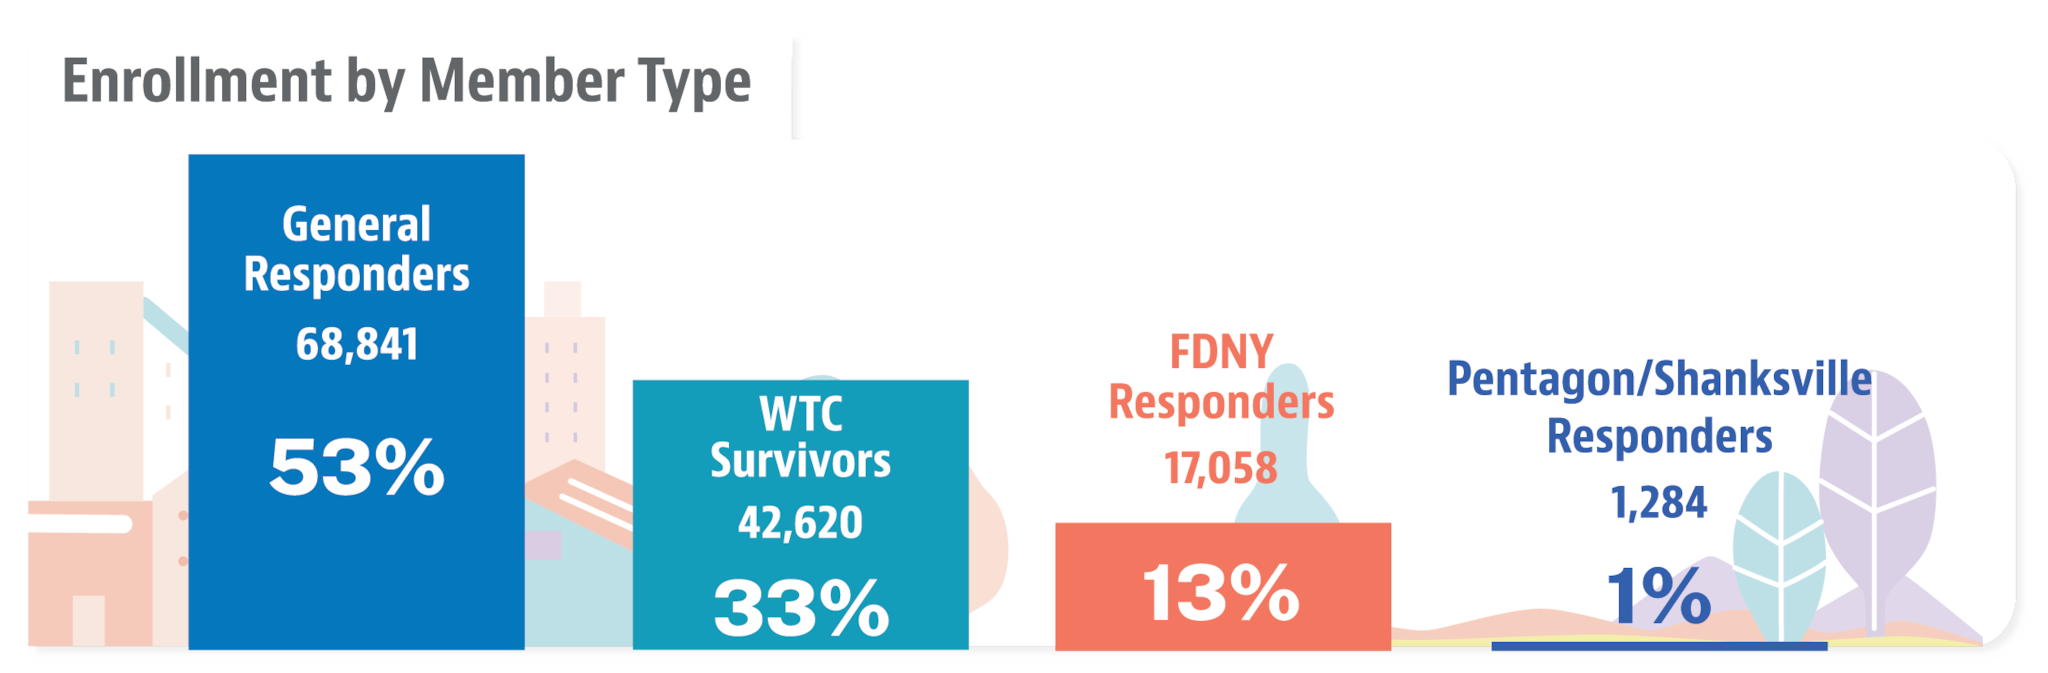 The chart shows the total number of enrolled members by type, updated as of December 2023. 53% of members were general responders or a total of 68,841. 33% were WTC survivors or a total of 42,620. 13% of members were FDNY responders or a total of 17,058. And 1% of members were Pentagon and Shanksville responders with a total of 1,284. 